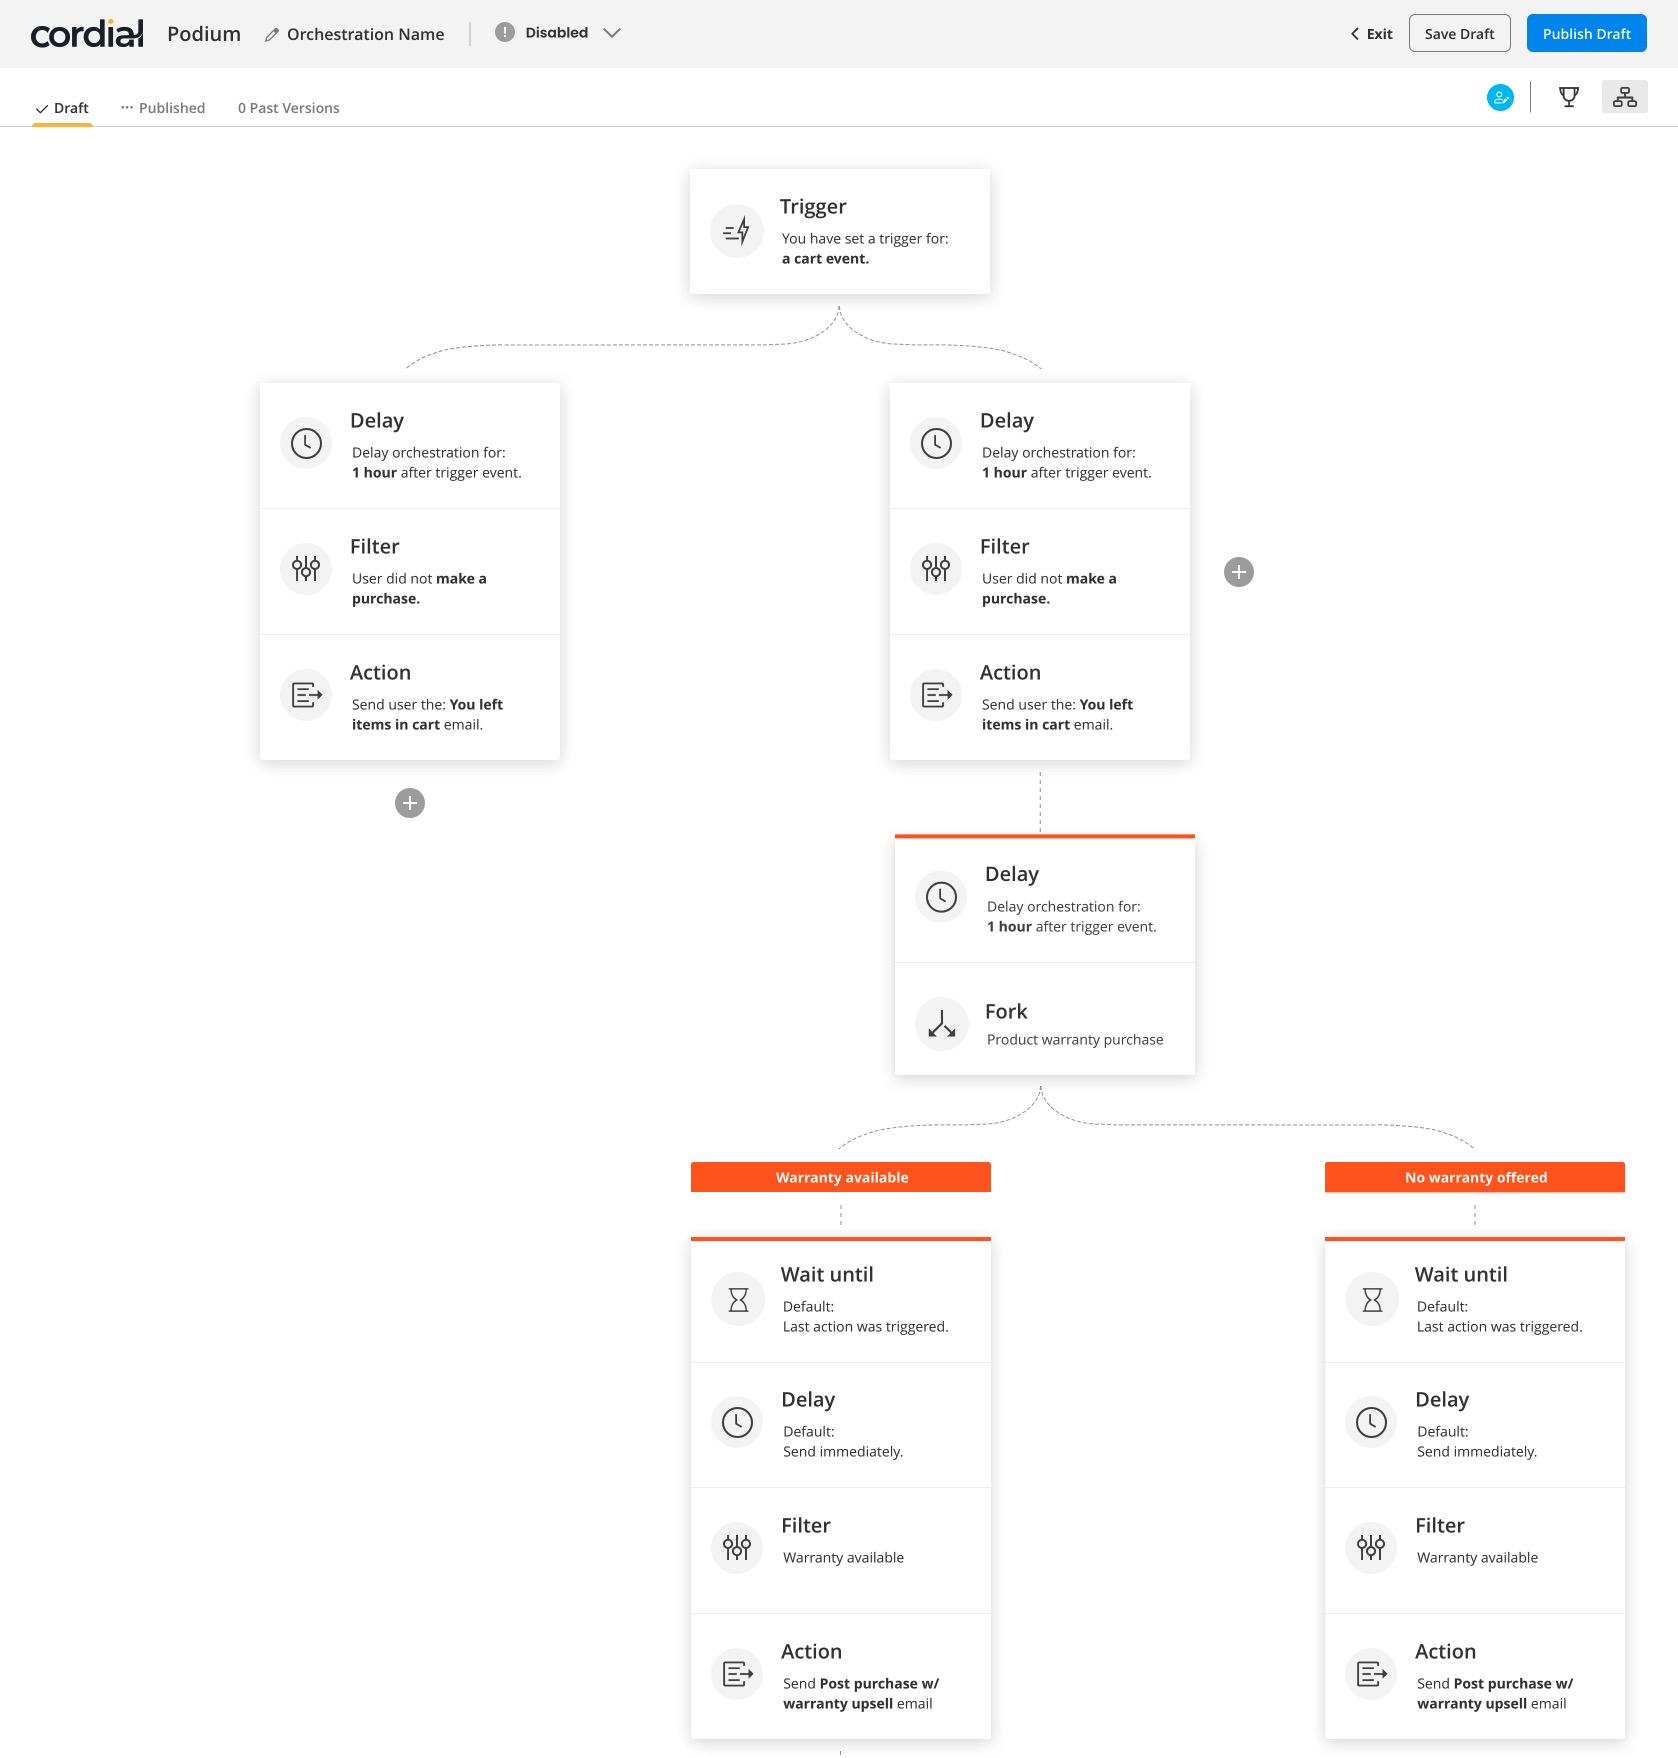 Design intelligent cross-channel marketing campaign orchestrations. With Cordial’s orchestration builder, easily connect personalized content, channels, customer and business data, and insights to design relevant customer journeys.